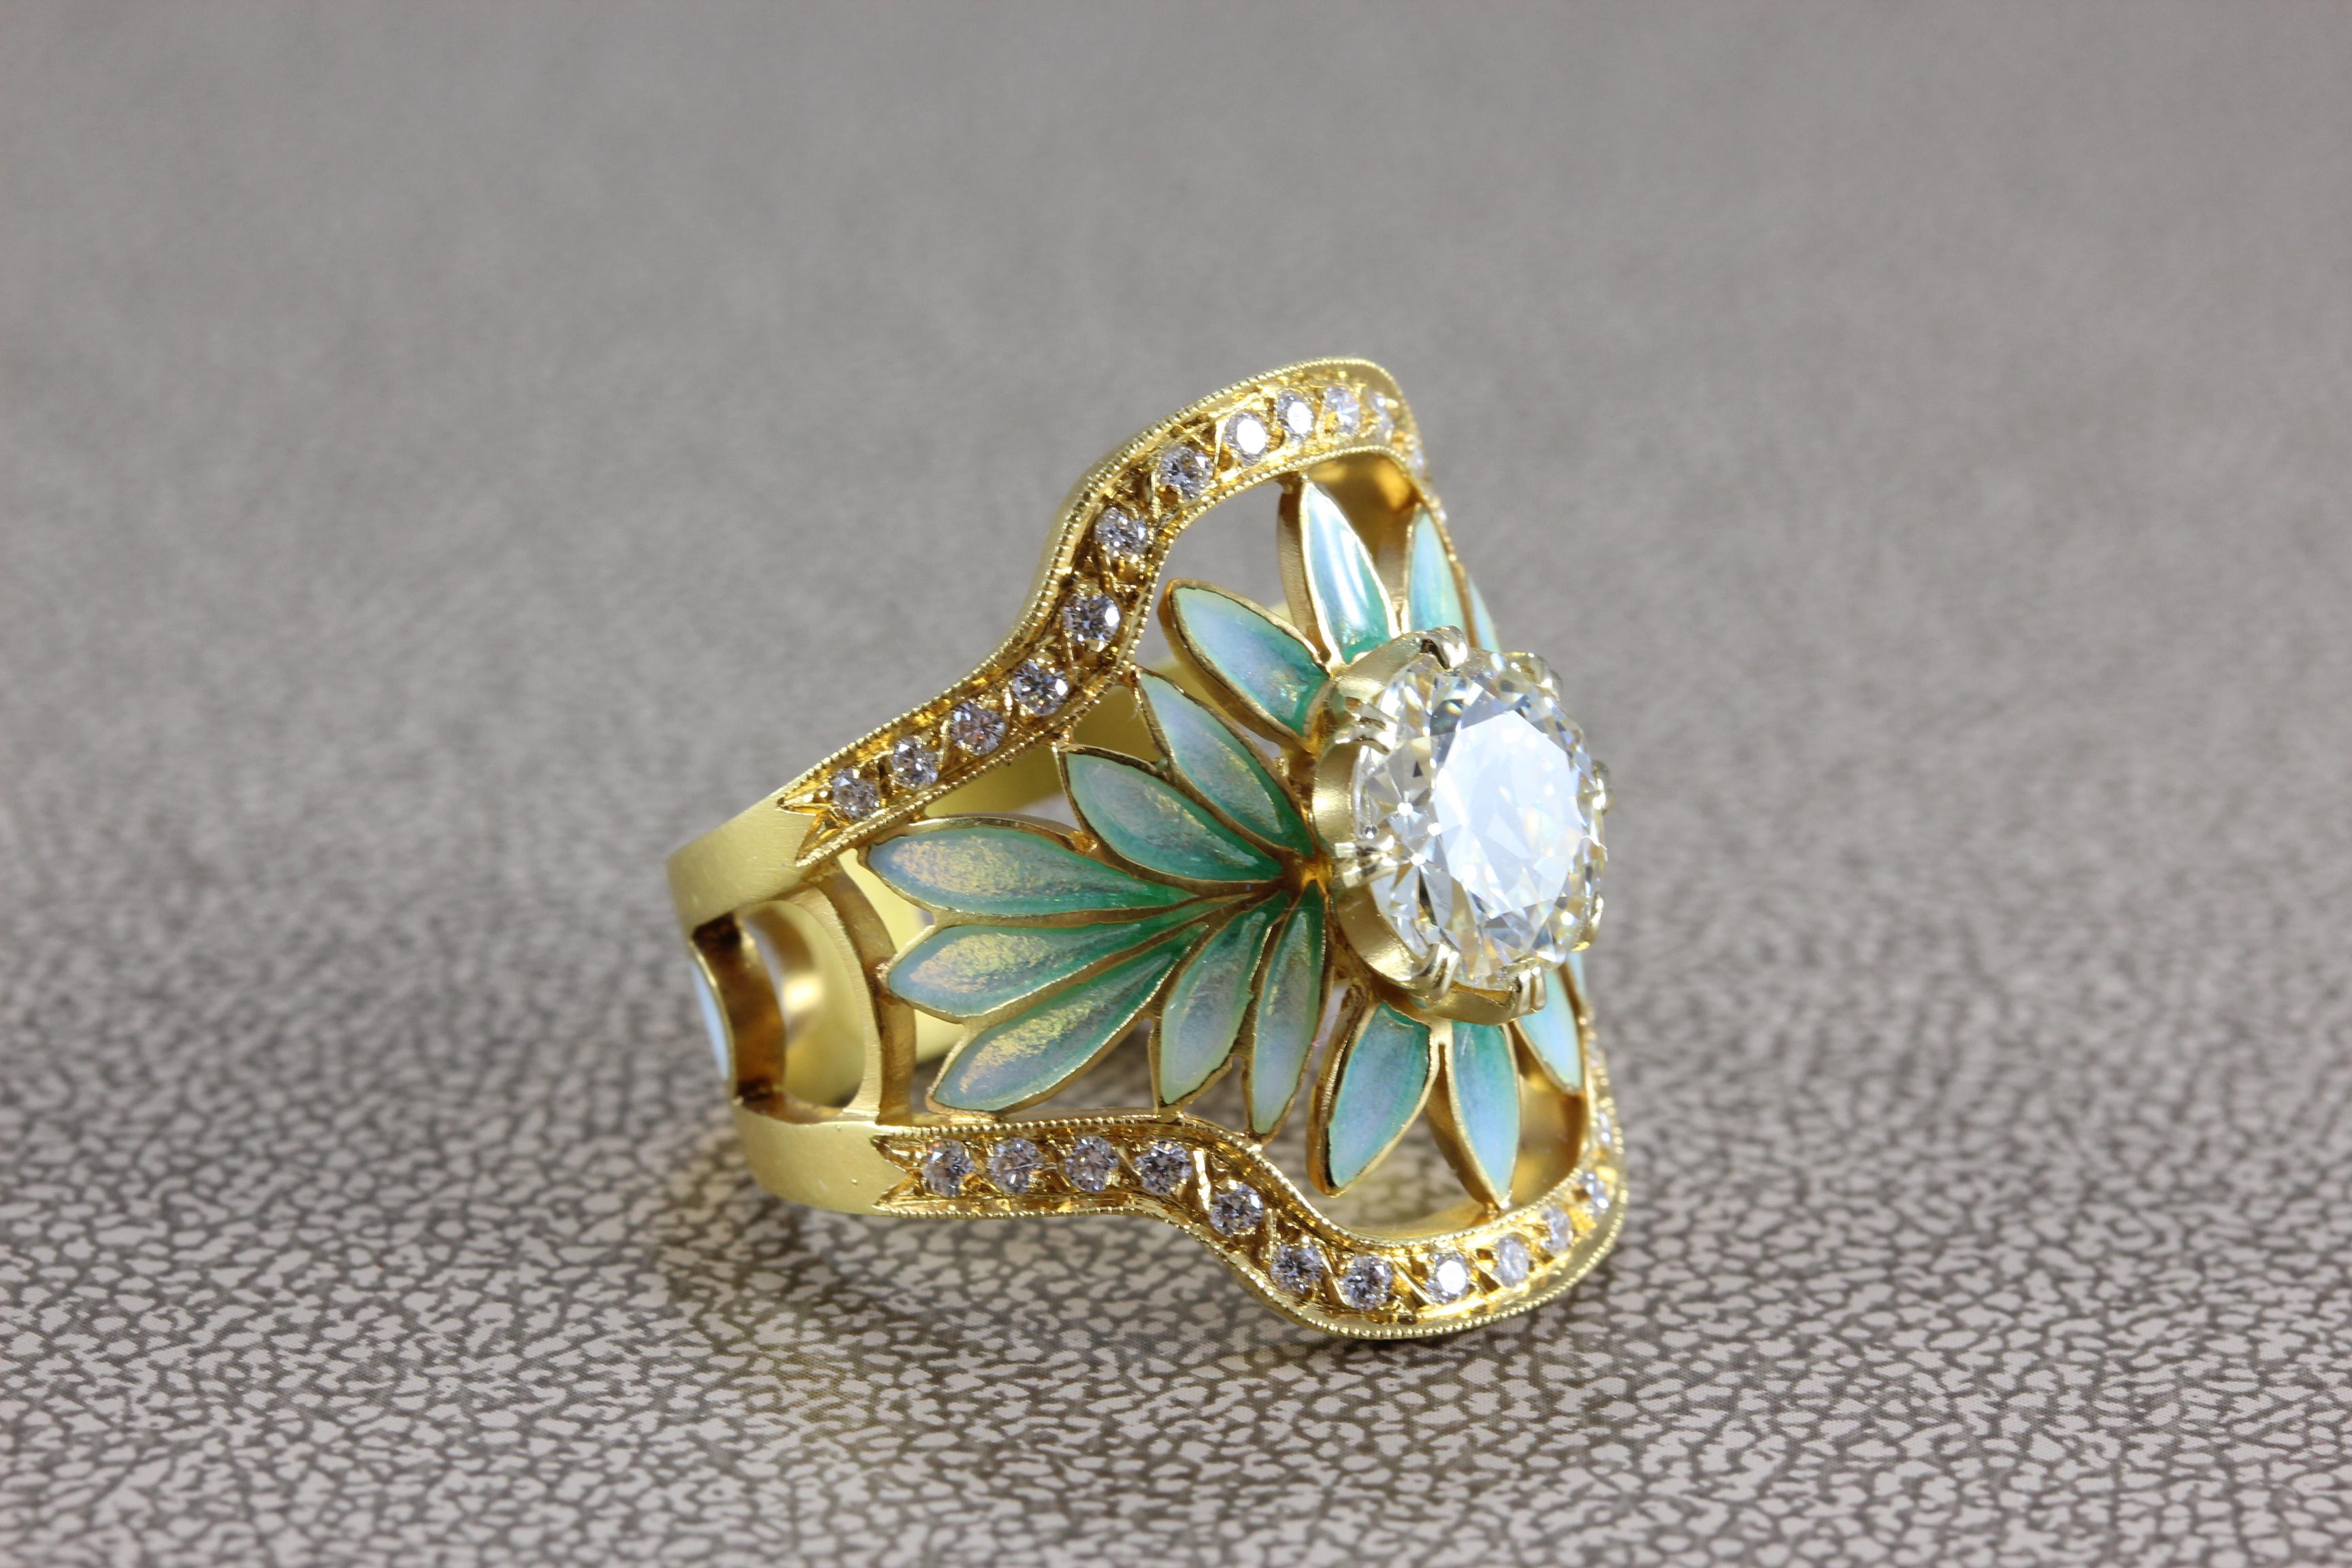 A special ring by the Spanish Barcelona based house of Masriera famous for their Art Nouveau style work and Plique-a-Jour enamel, as seen in fine examples in this fabulous piece. The ring mains a 1.80 carat round cut diamond with VS clarity.